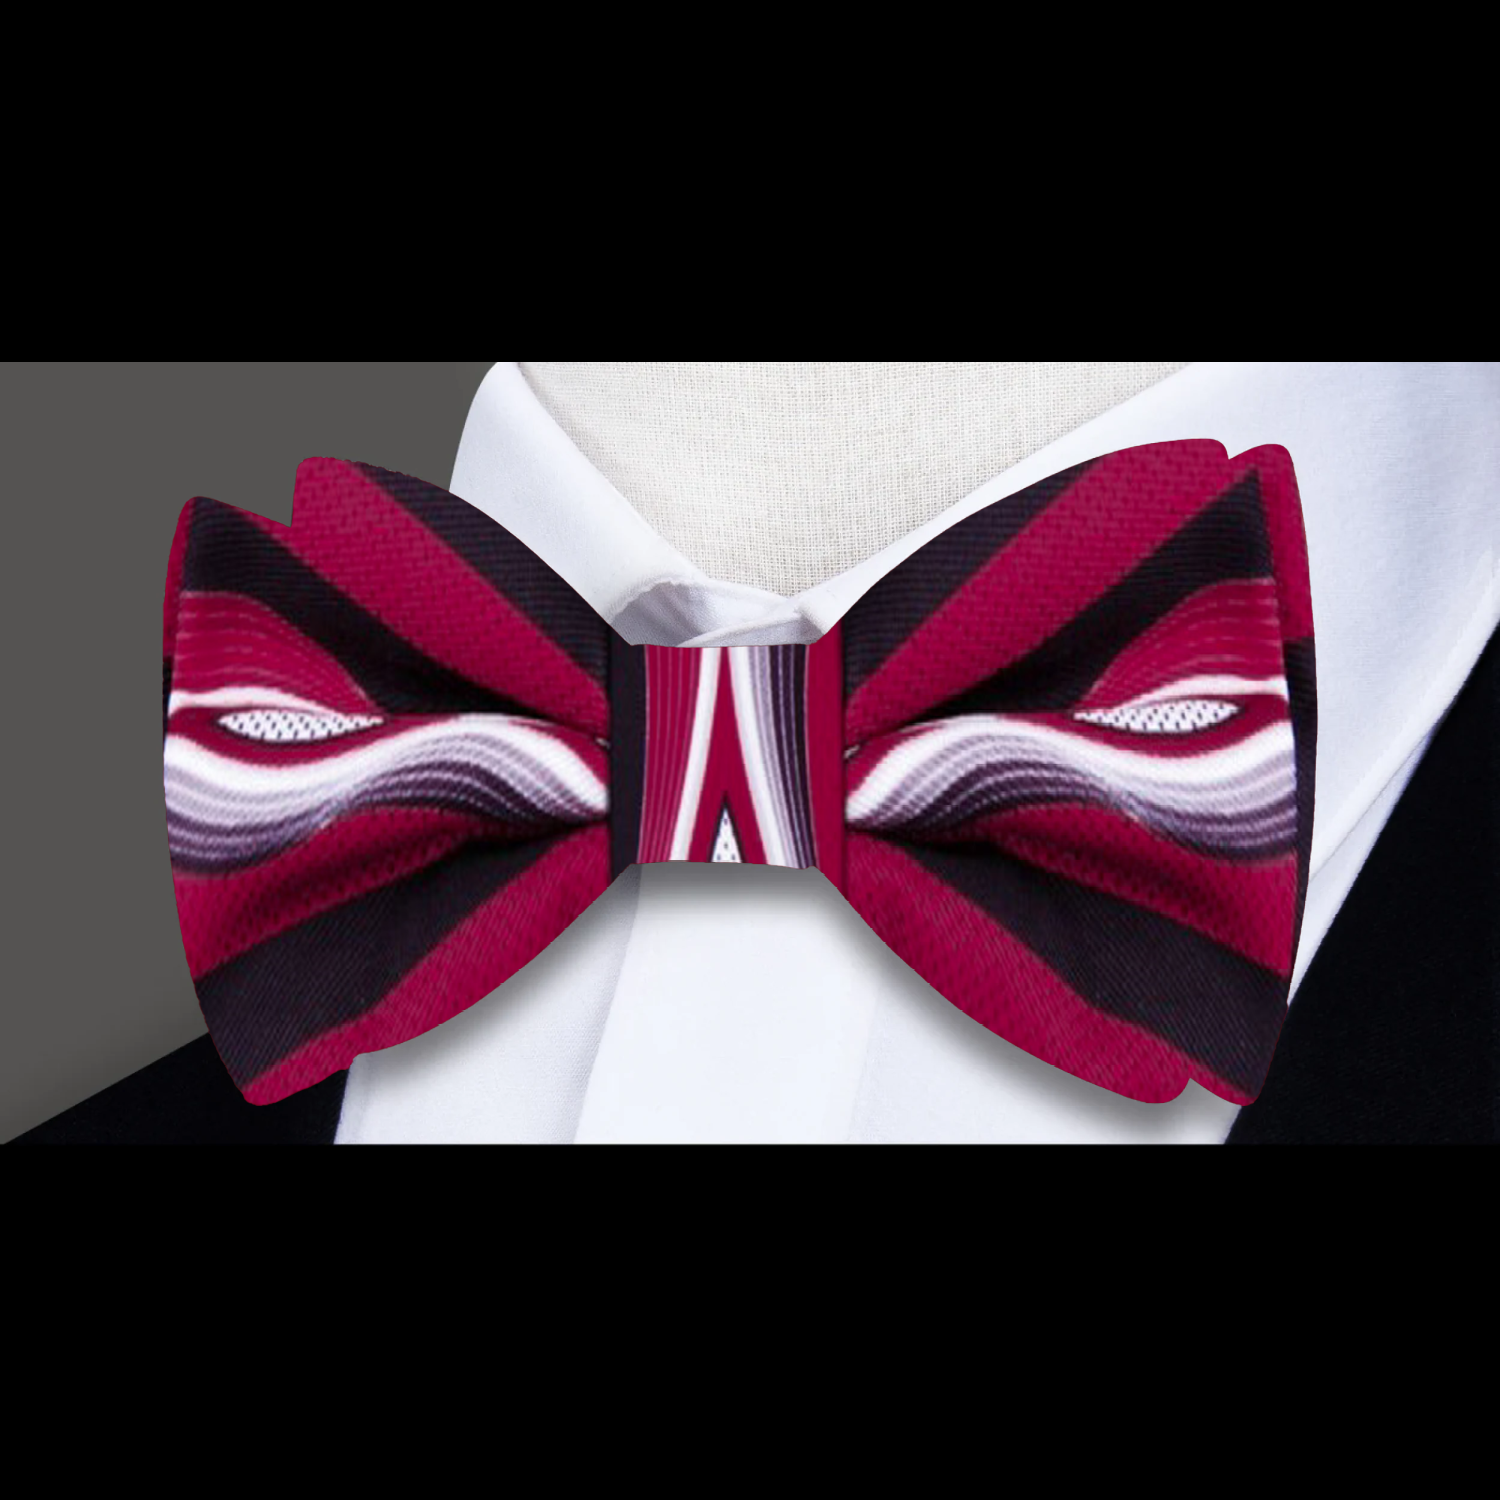 A Dark Red, Black and Grey Wavy Abstract Bow Tie